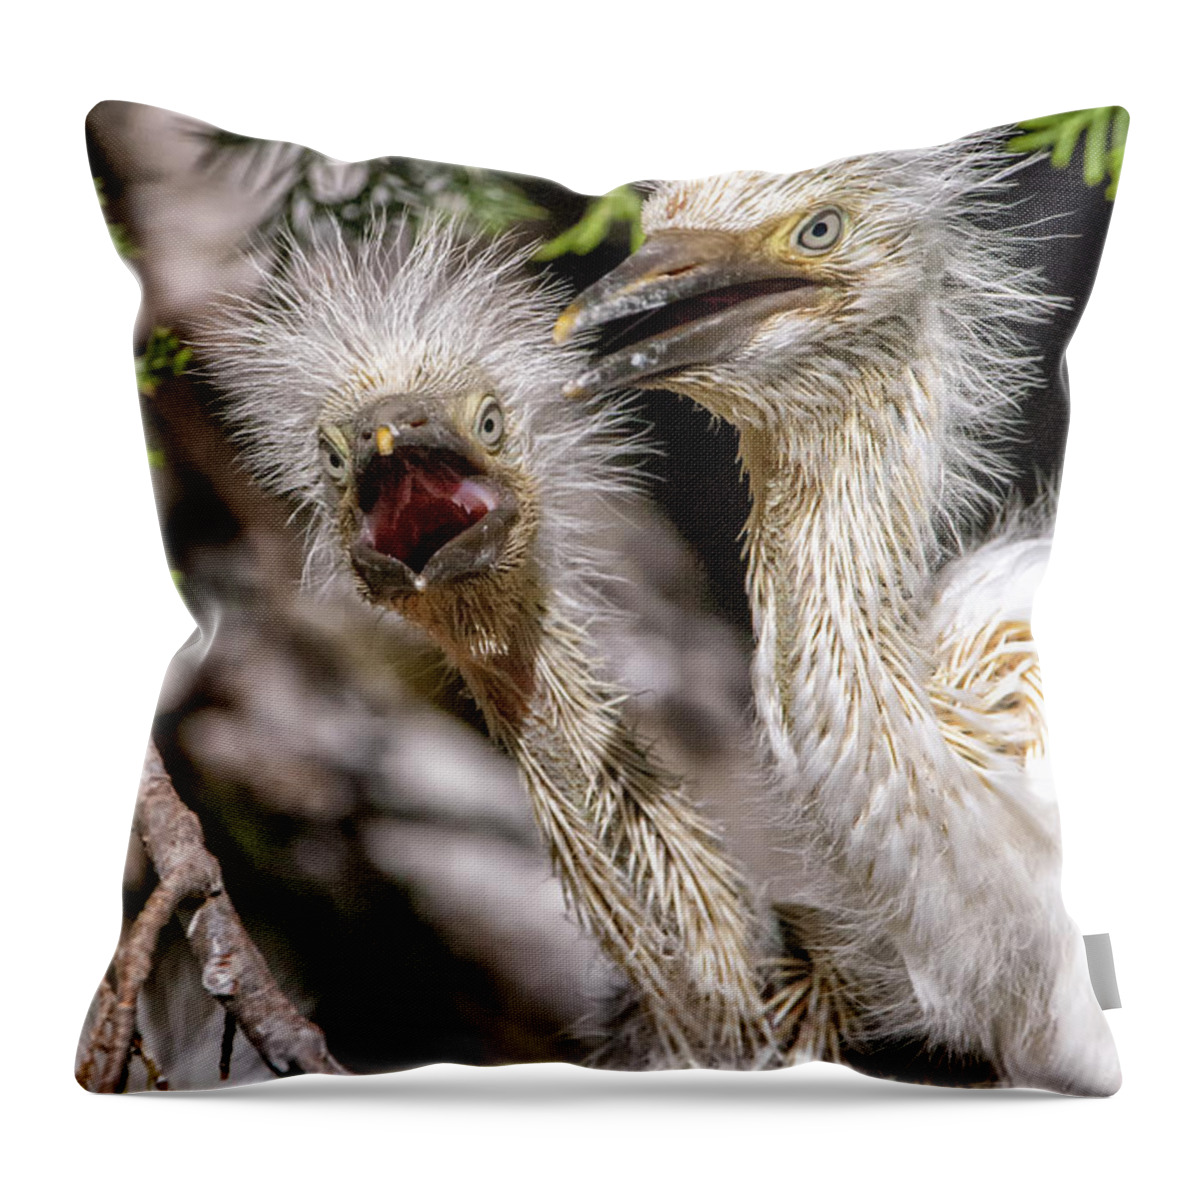 Crystal Yingling Throw Pillow featuring the photograph What by Ghostwinds Photography